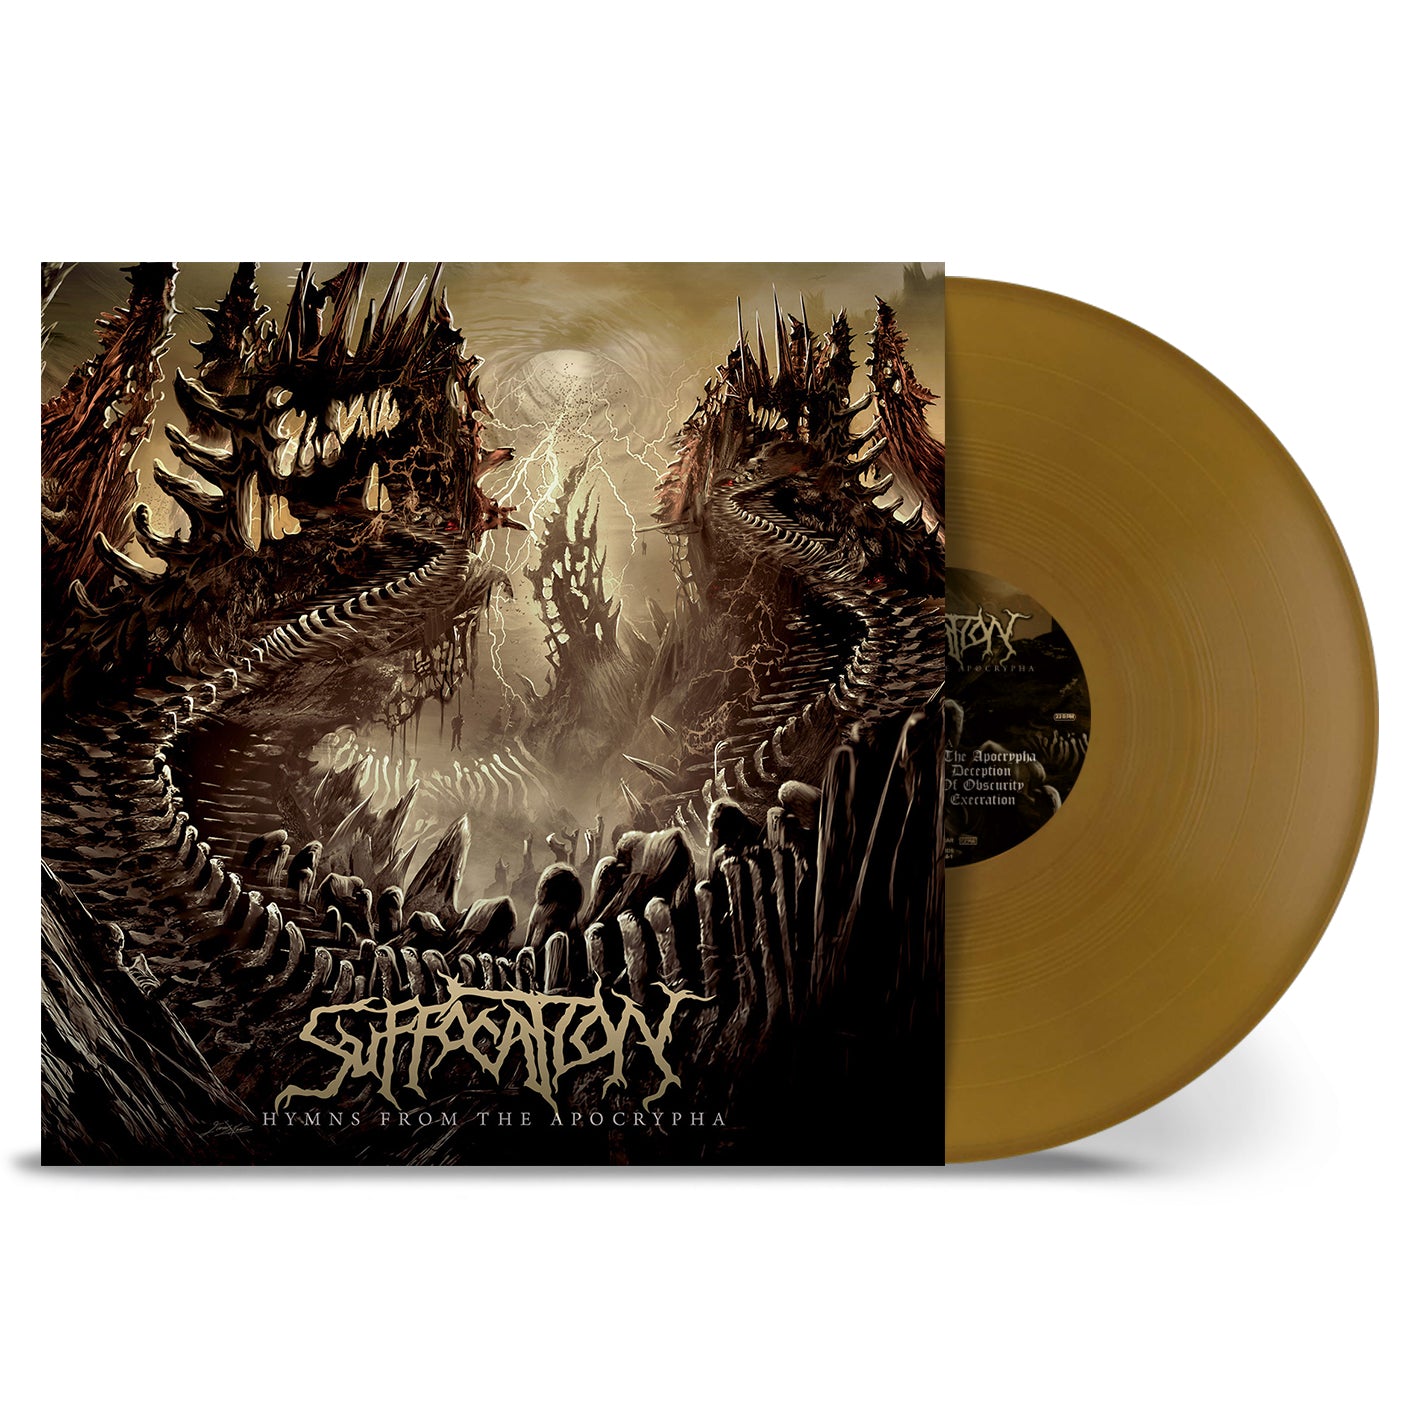 Suffocation "Hymns From The Apocrypha" Gold Vinyl